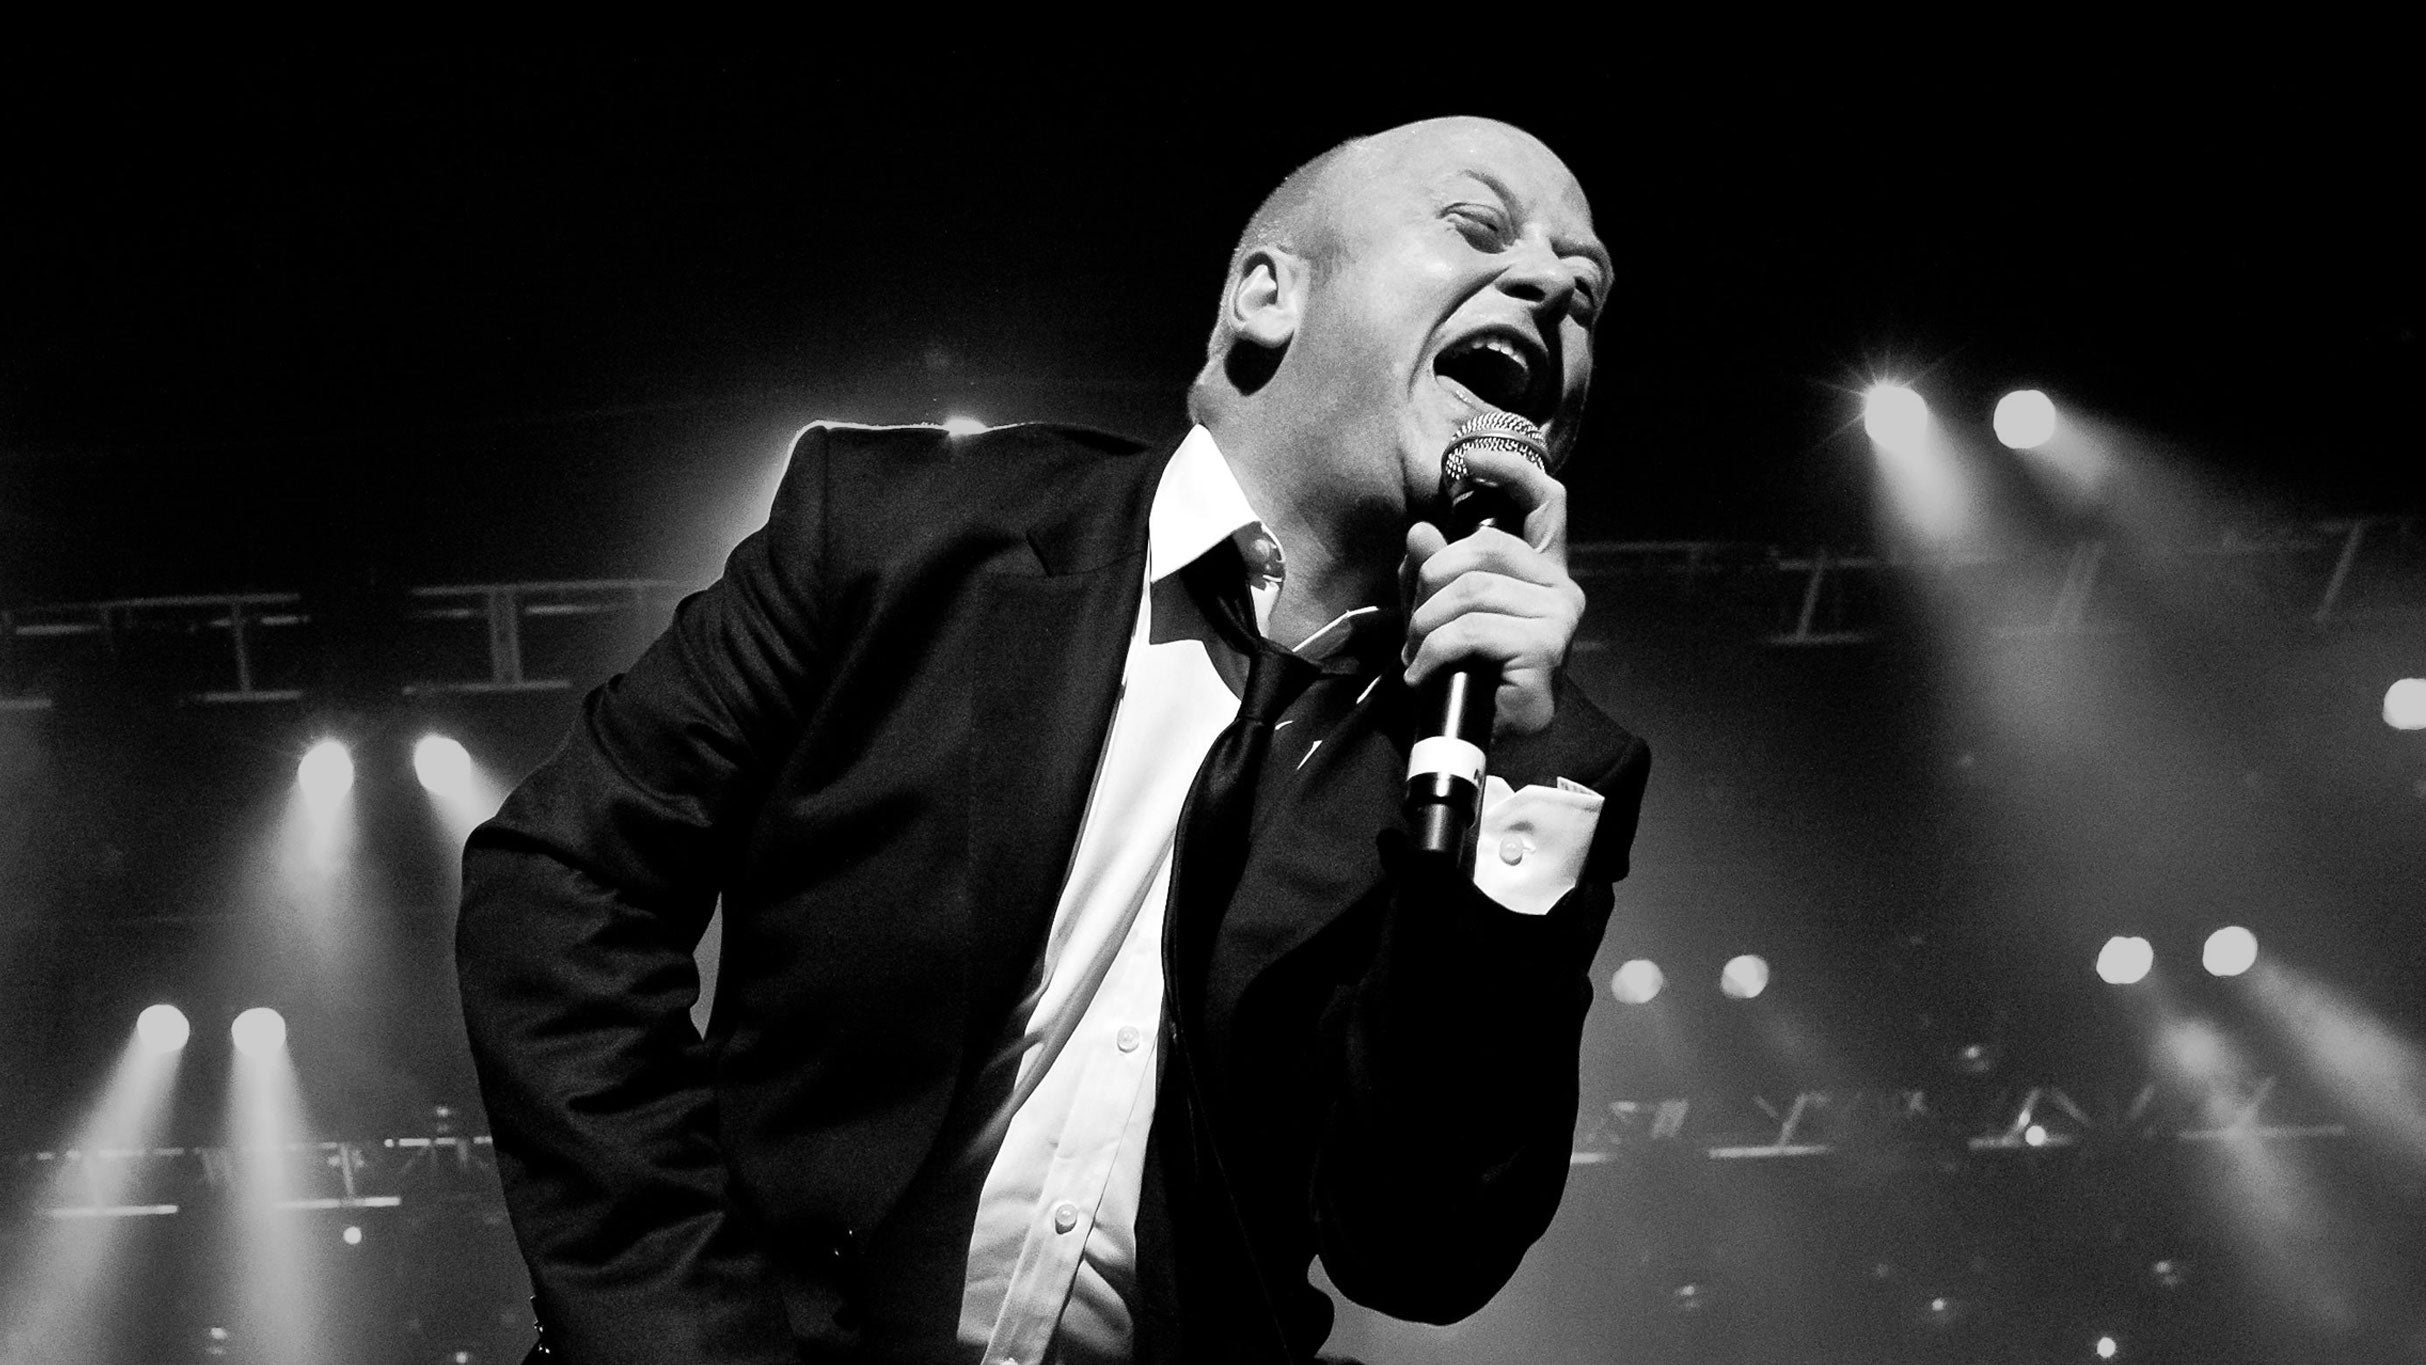 Andrew Strong: Performs The Commitments soundtrack in full in Brisbane promo photo for Promoter presale offer code